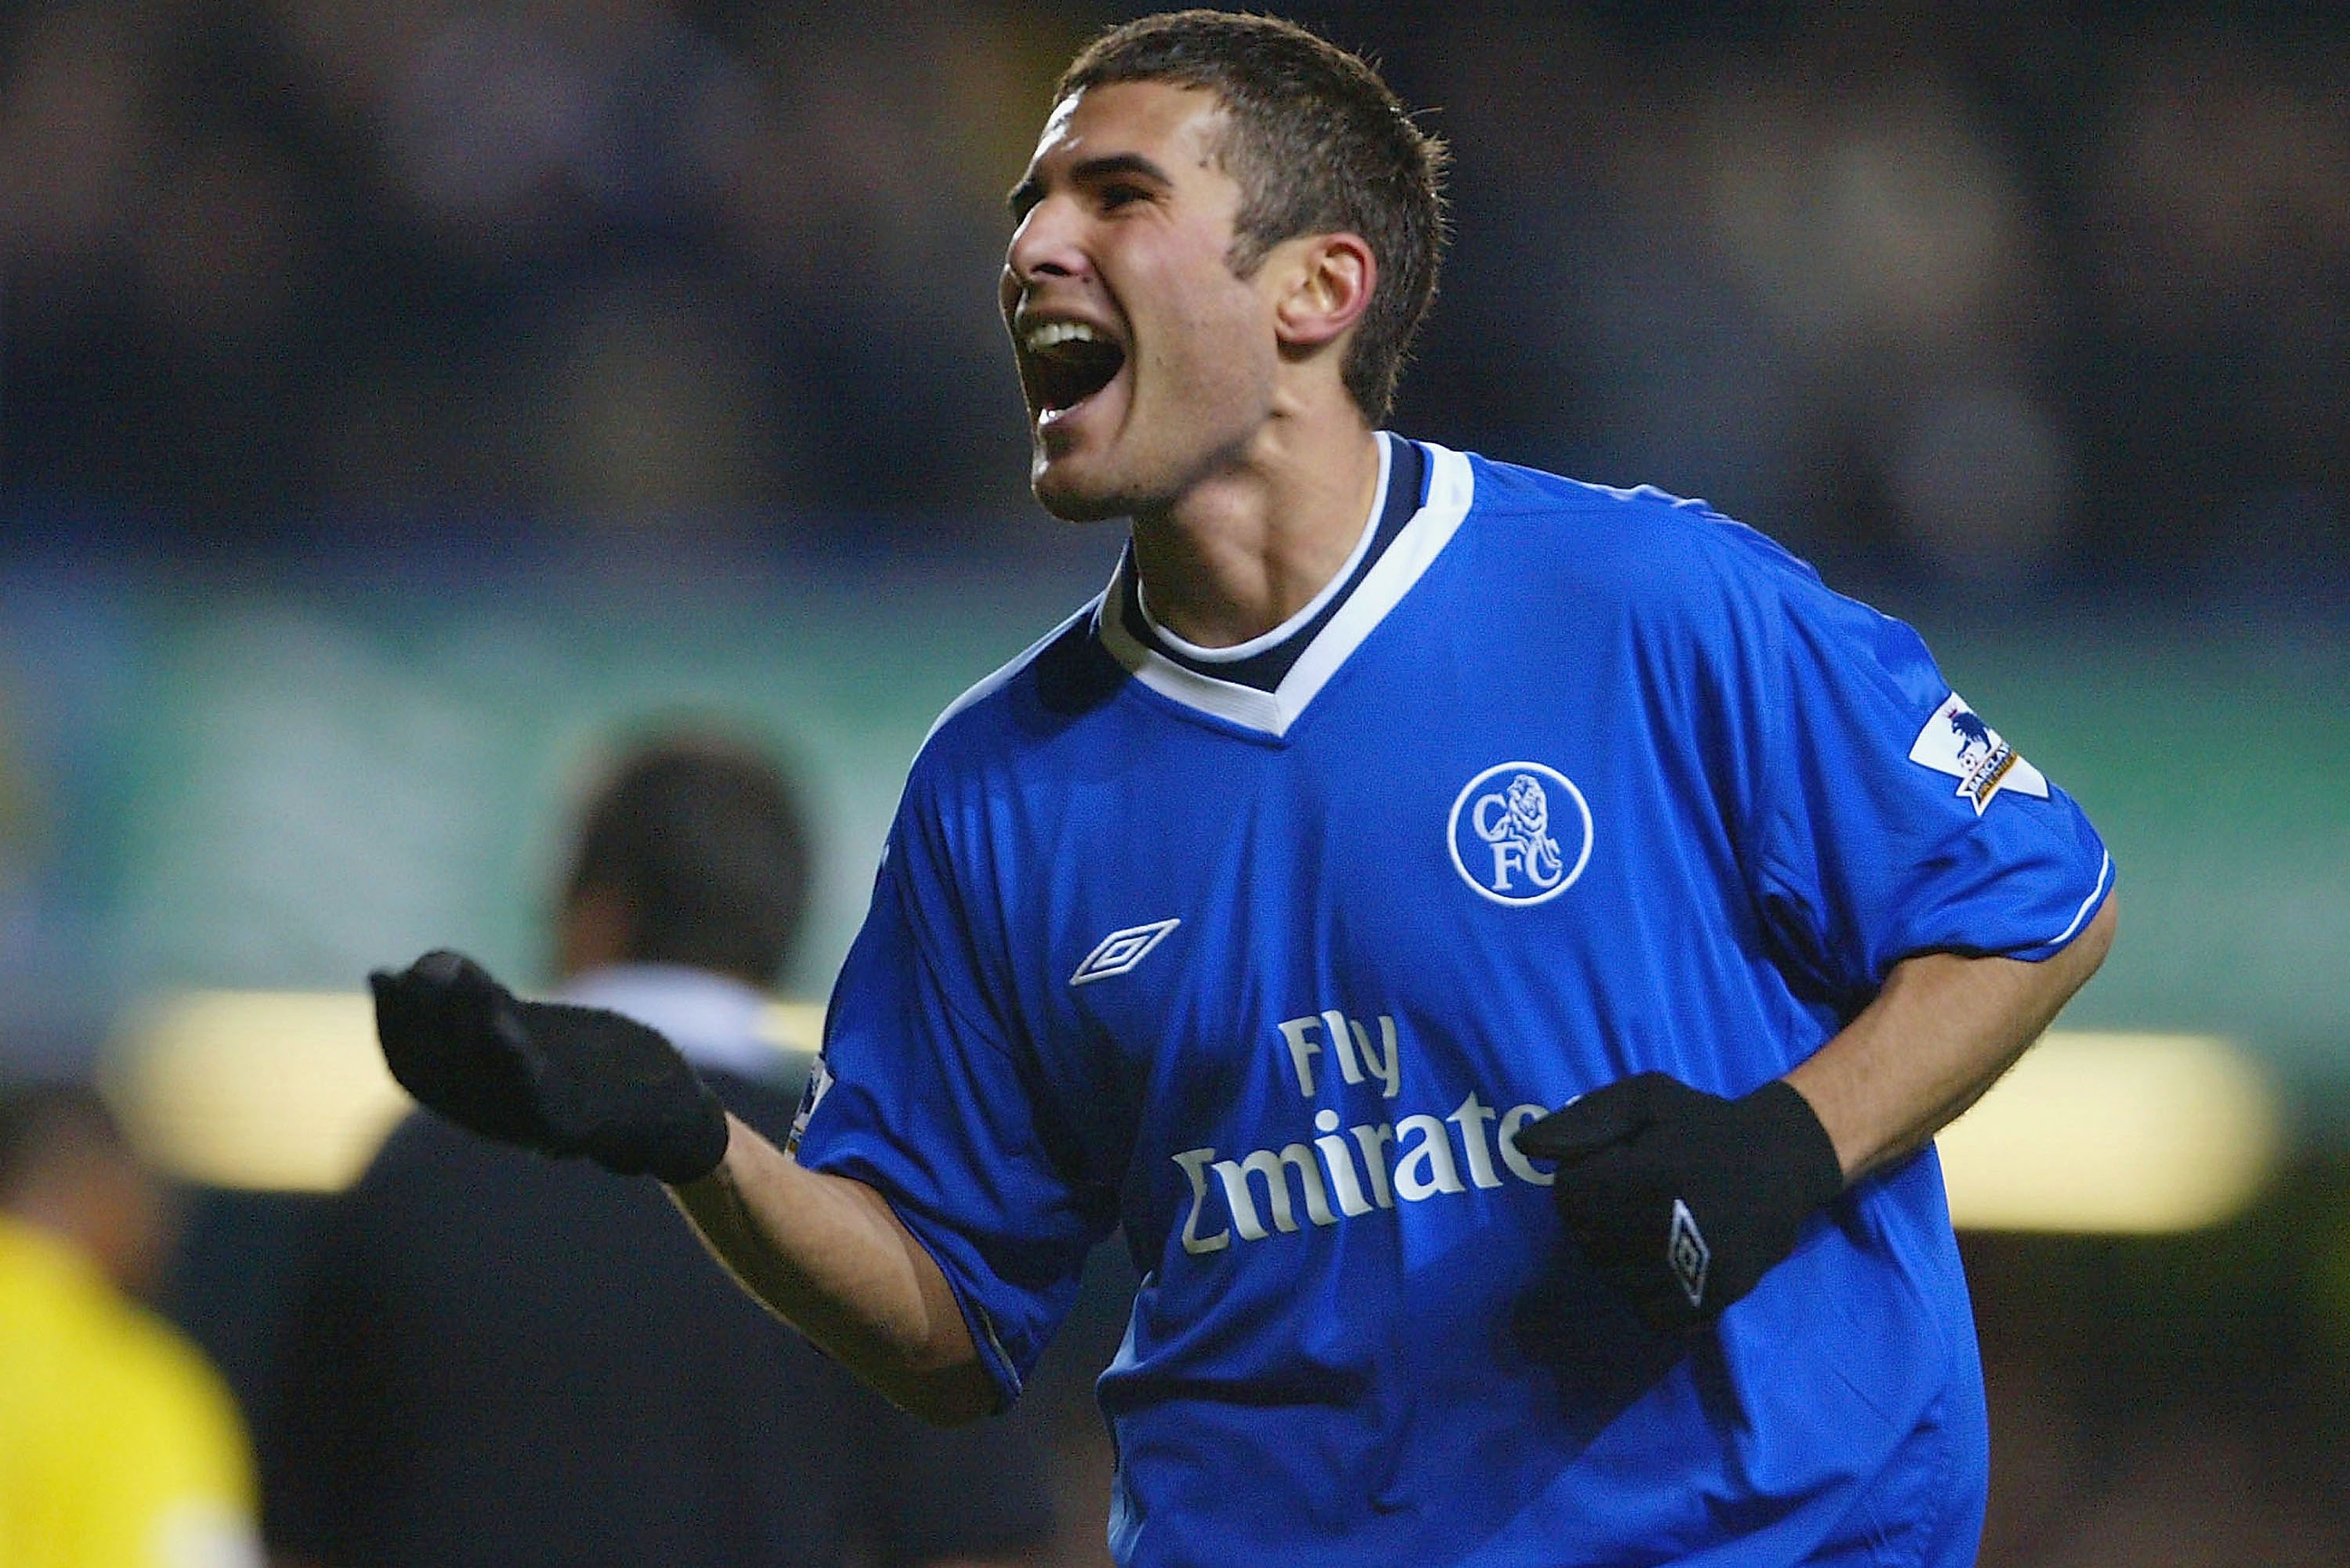 Report: Adrian Mutu's Latest Appeal Against Chelsea Compensation Denied | Bleacher Report | Latest News, Videos and Highlights